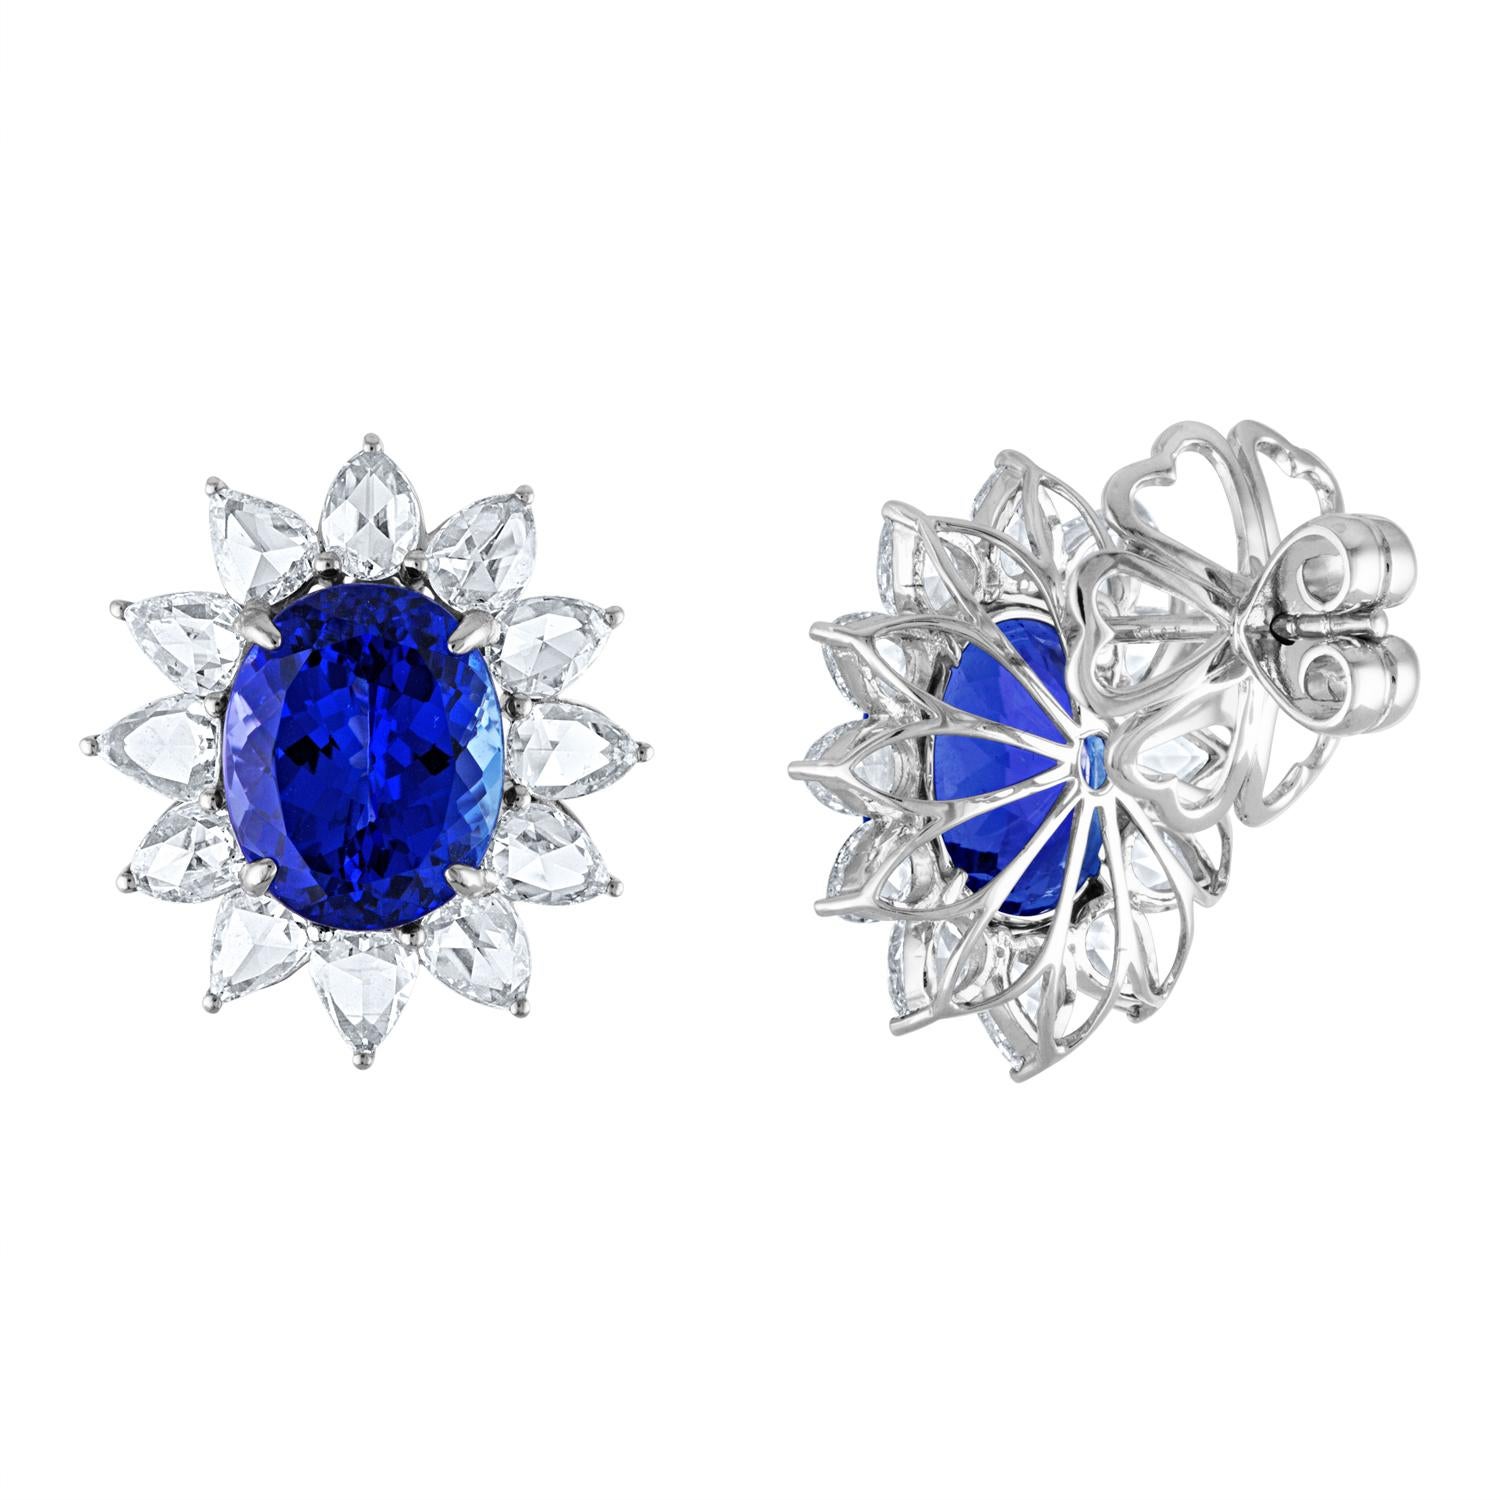 Custom One of a Kind Earrings
The earrings 18K White Gold
There are 3.87 Carats in Rose Cut Pear Shaped Diamonds F VS
The center stones are Tanzanite totaling 12.70 Carats
The earrings measure 21.00mm x 19.00mm
The earrings weigh 12.00 grams